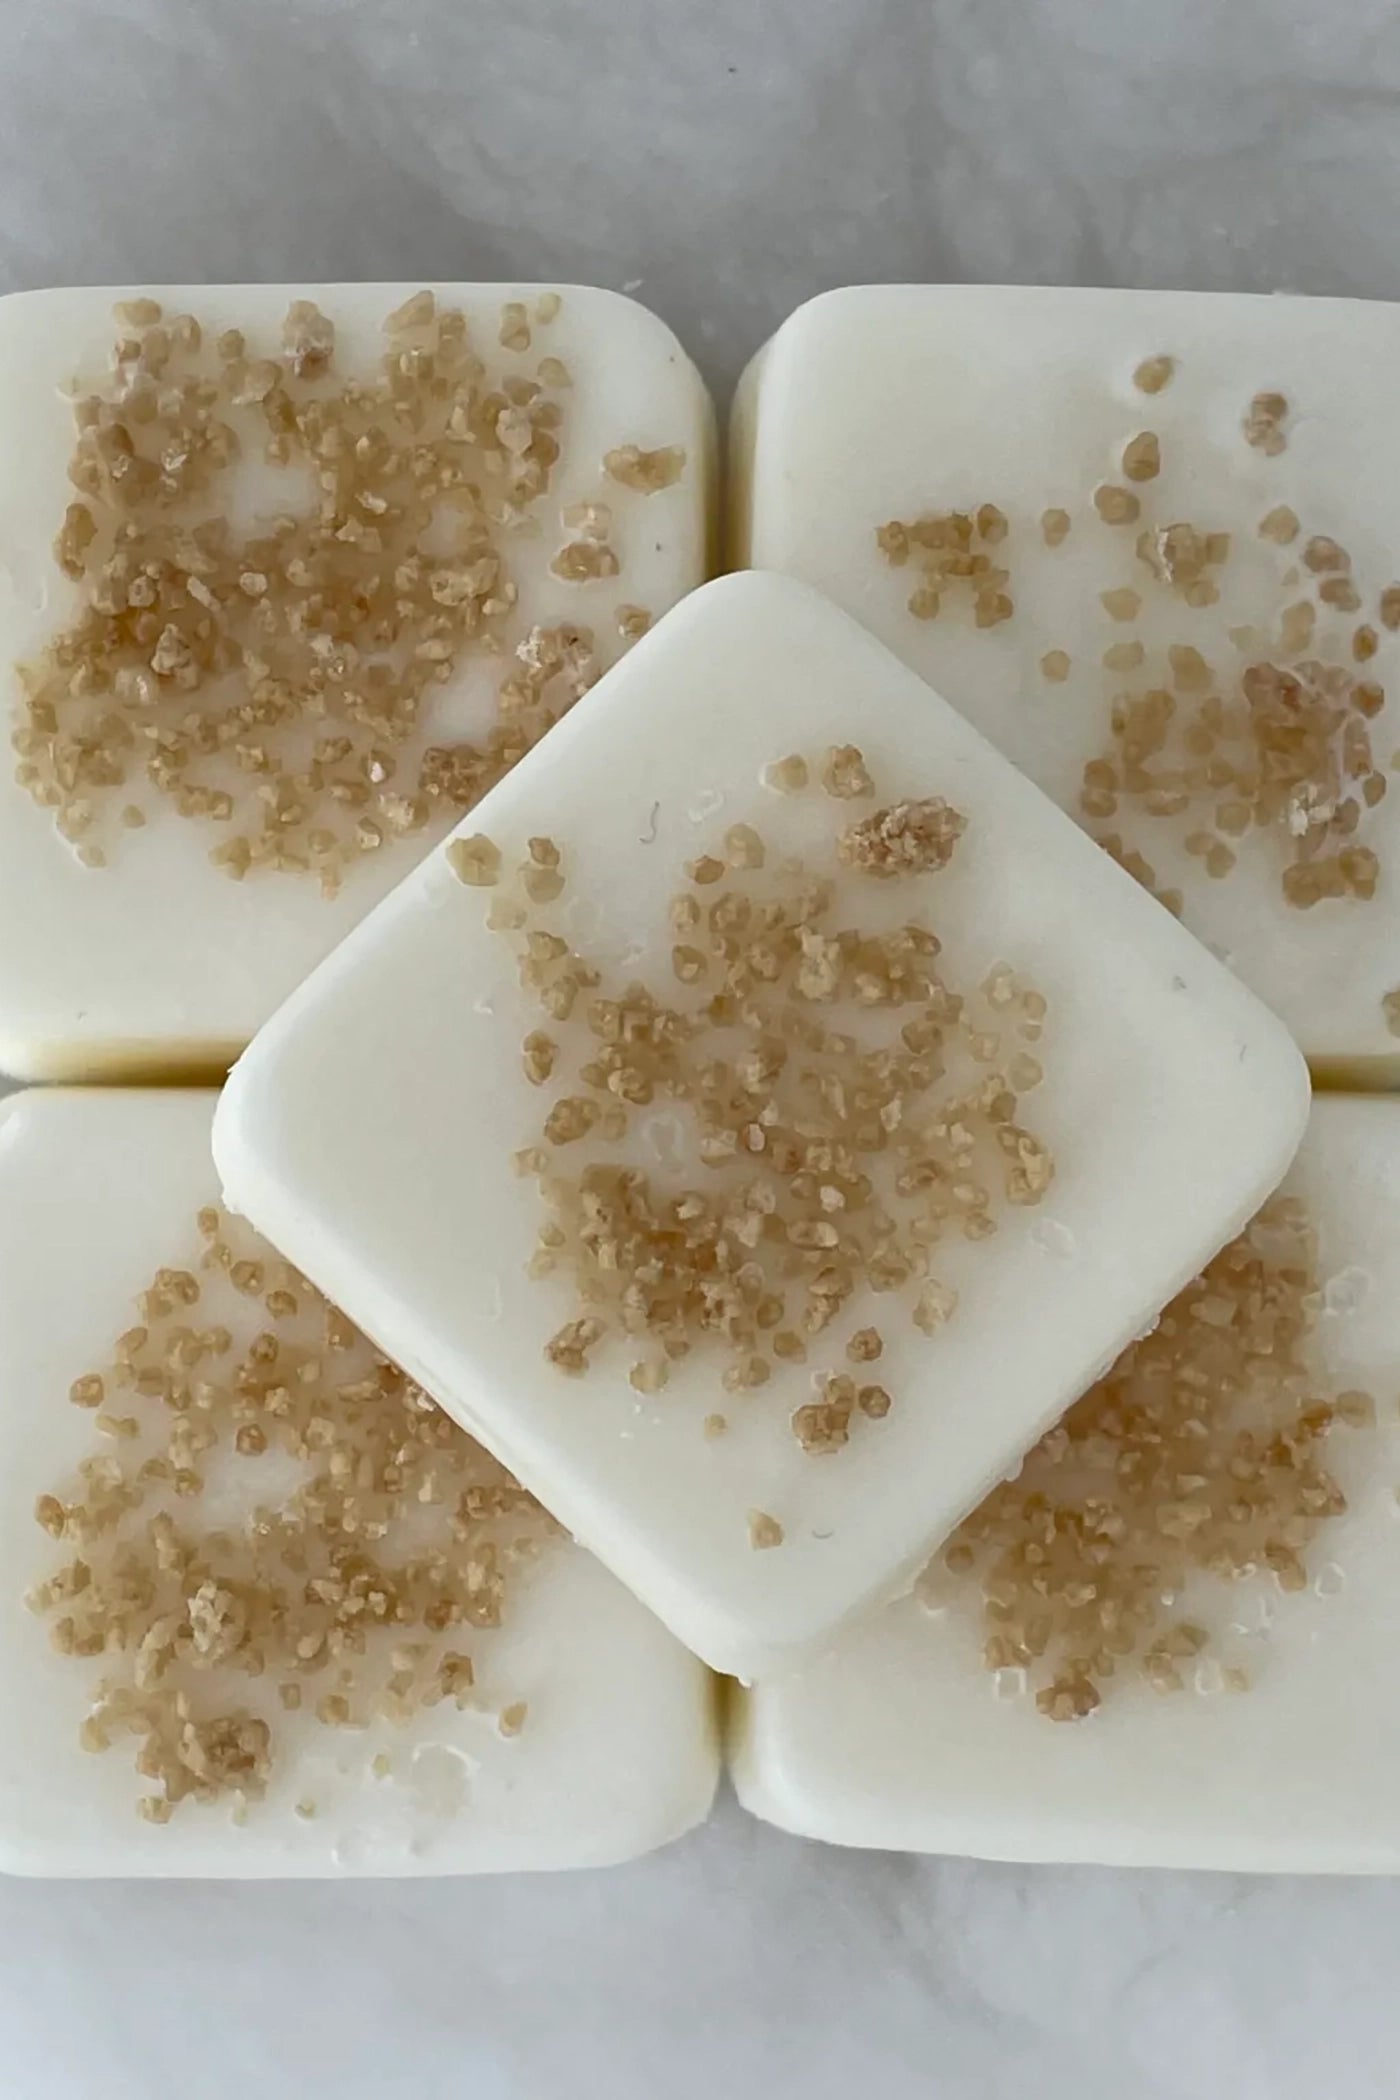 multiple white wax melts with pieces from the scent profile in the wax.